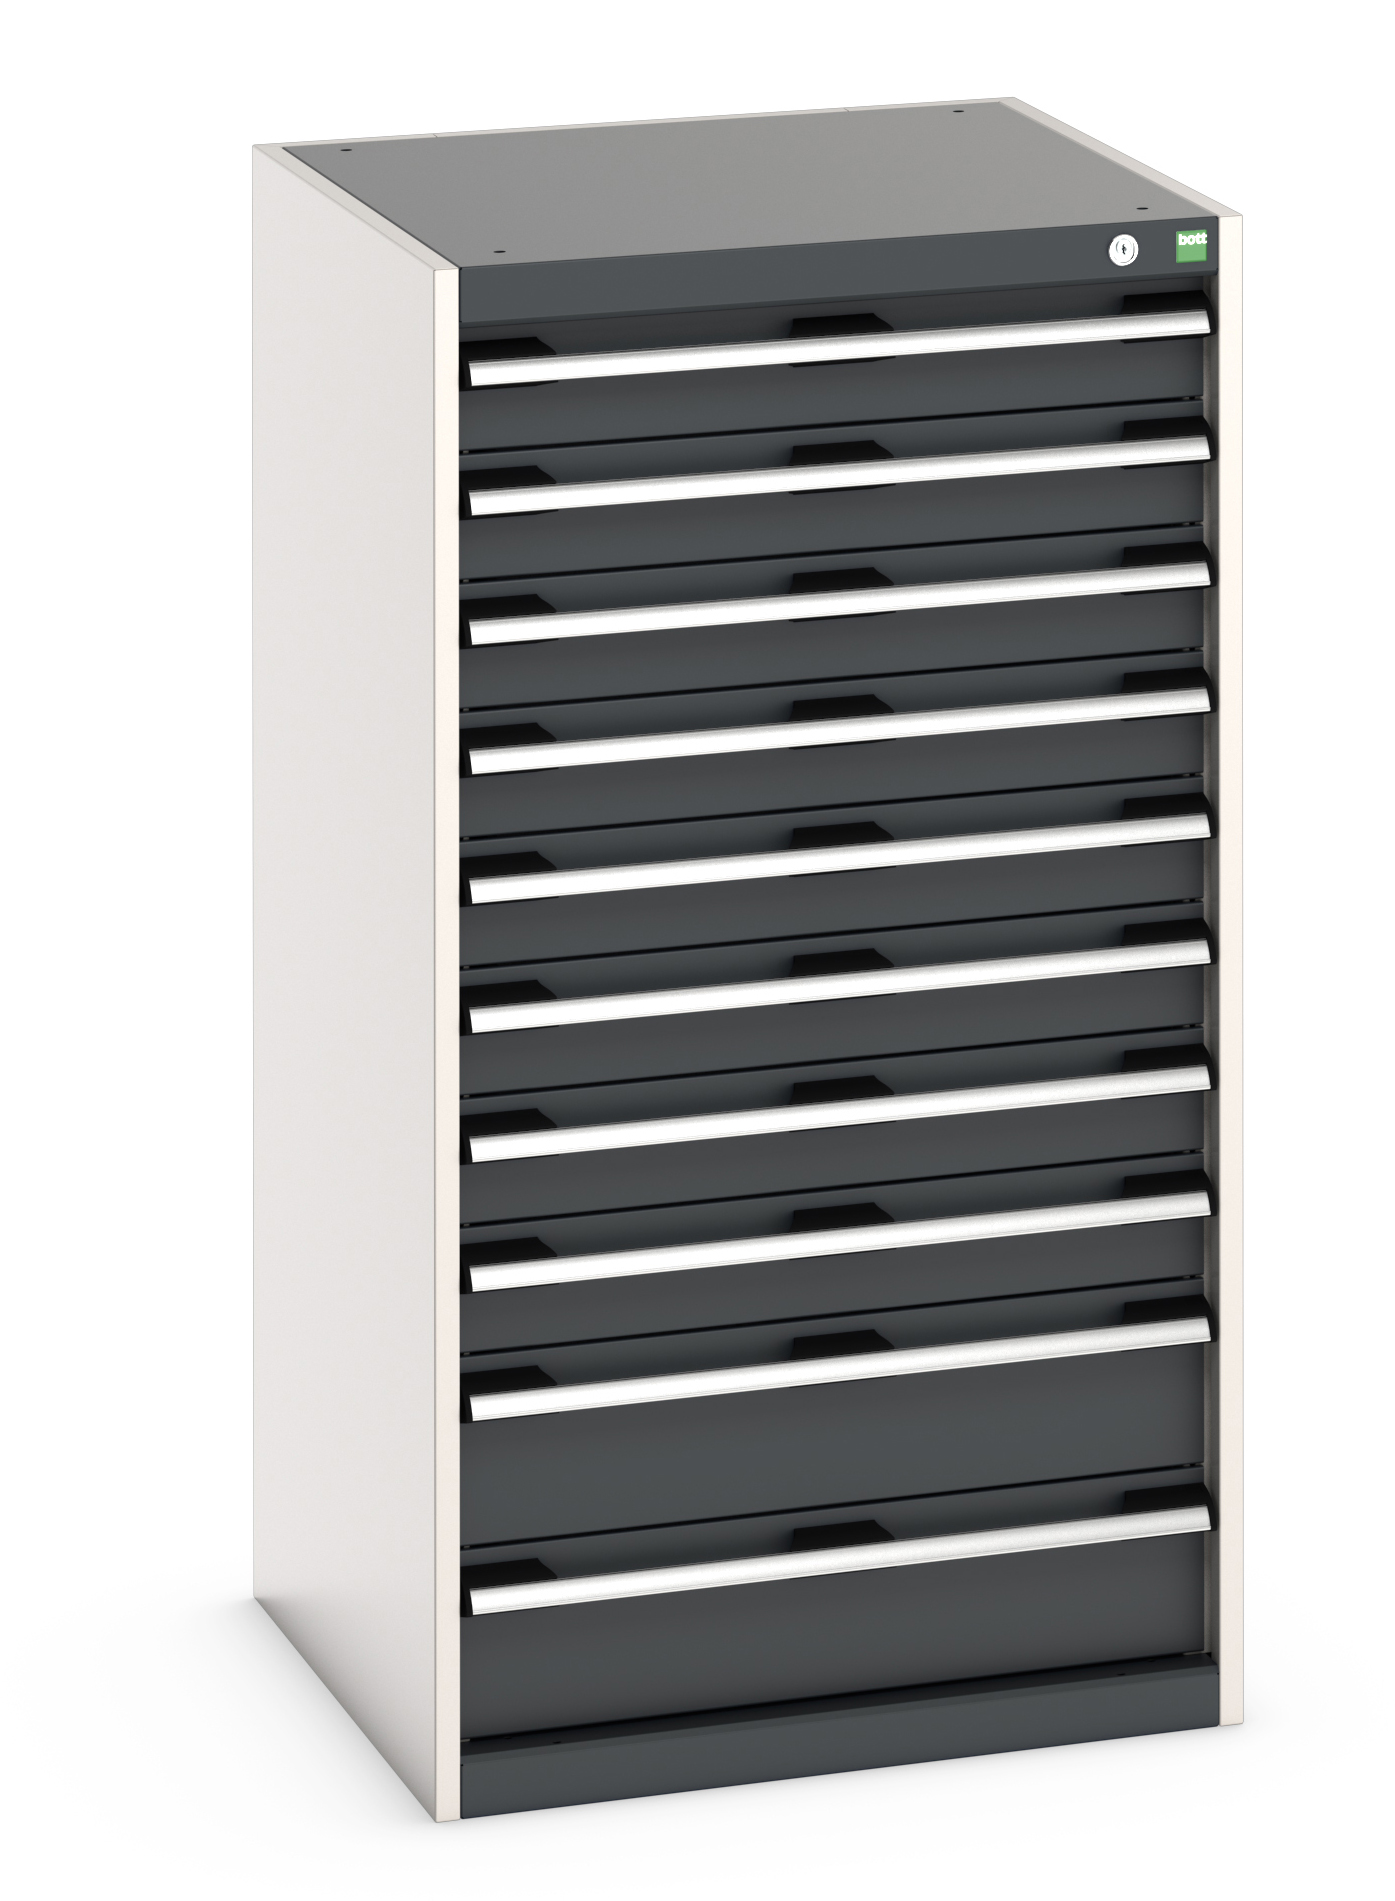 Bott Cubio Drawer Cabinet With 10 Drawers - 40019075.19V